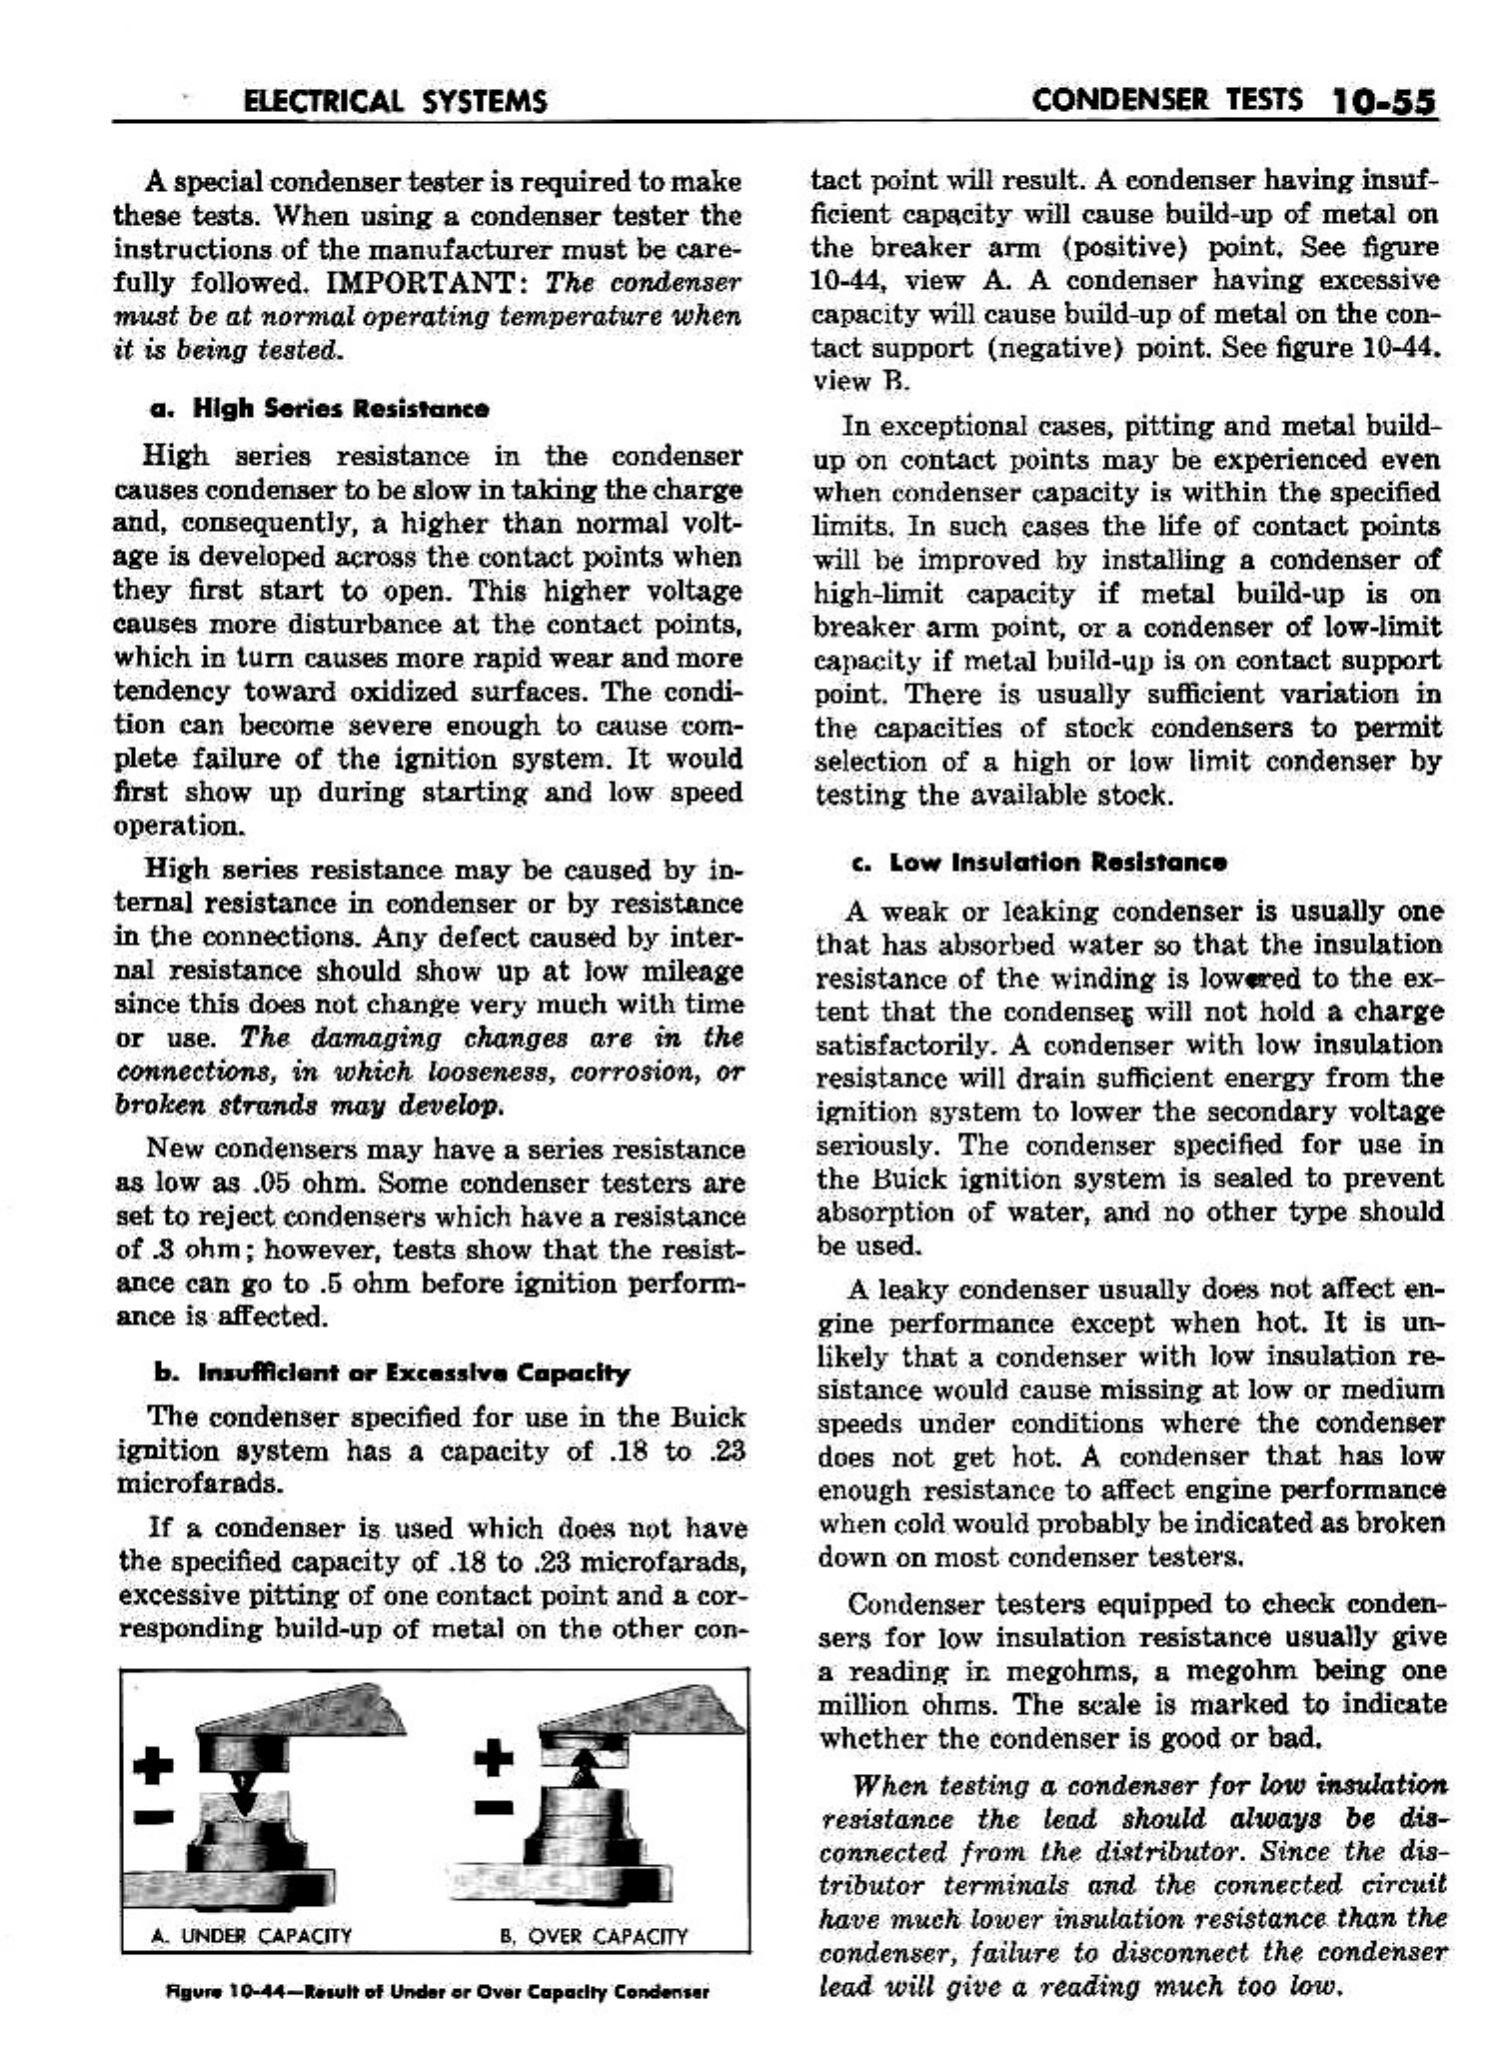 n_11 1958 Buick Shop Manual - Electrical Systems_55.jpg